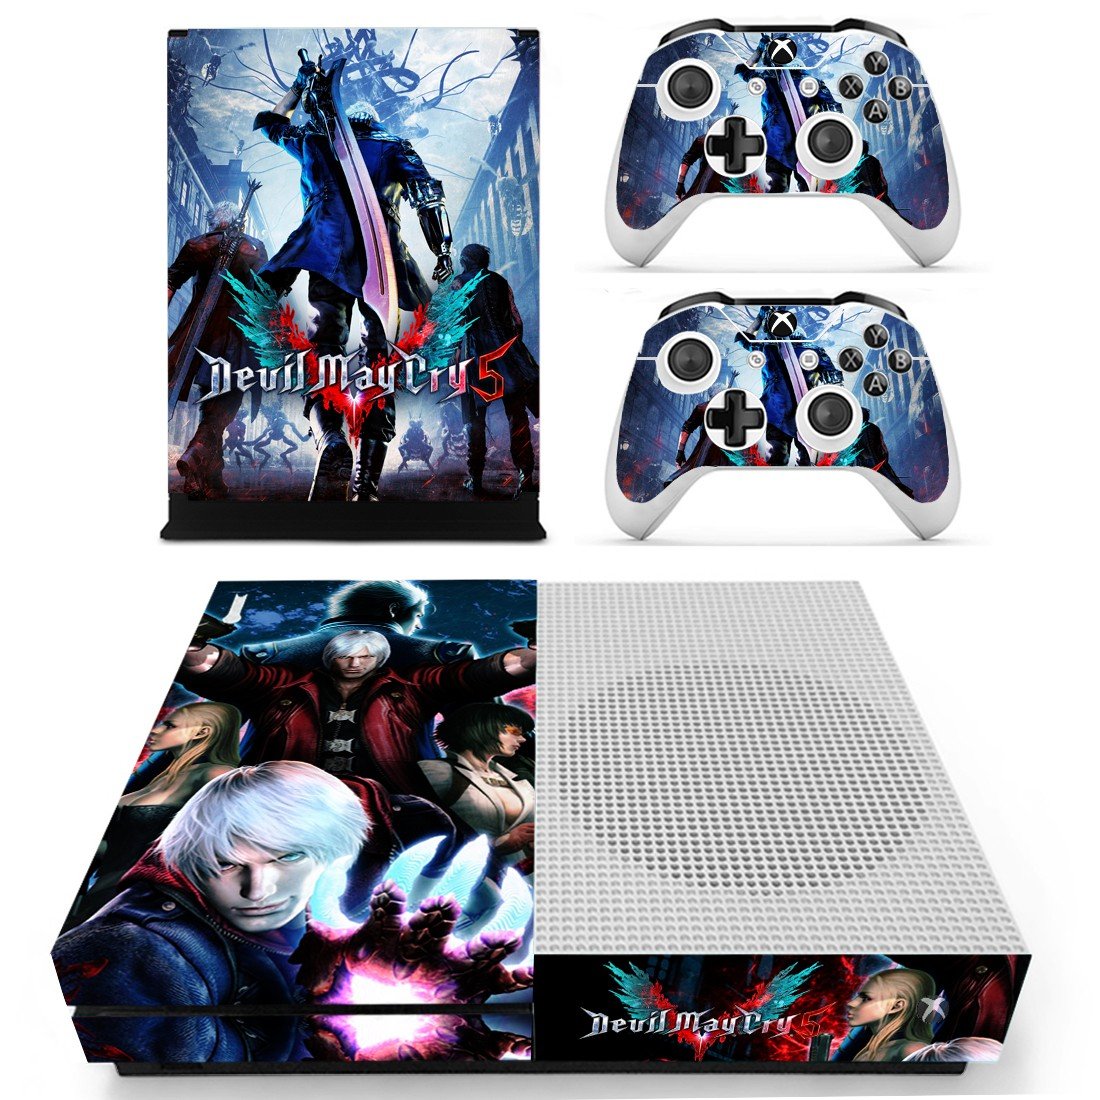 Xbox One S And Controllers Skin Sticker - Devil May Cry 5